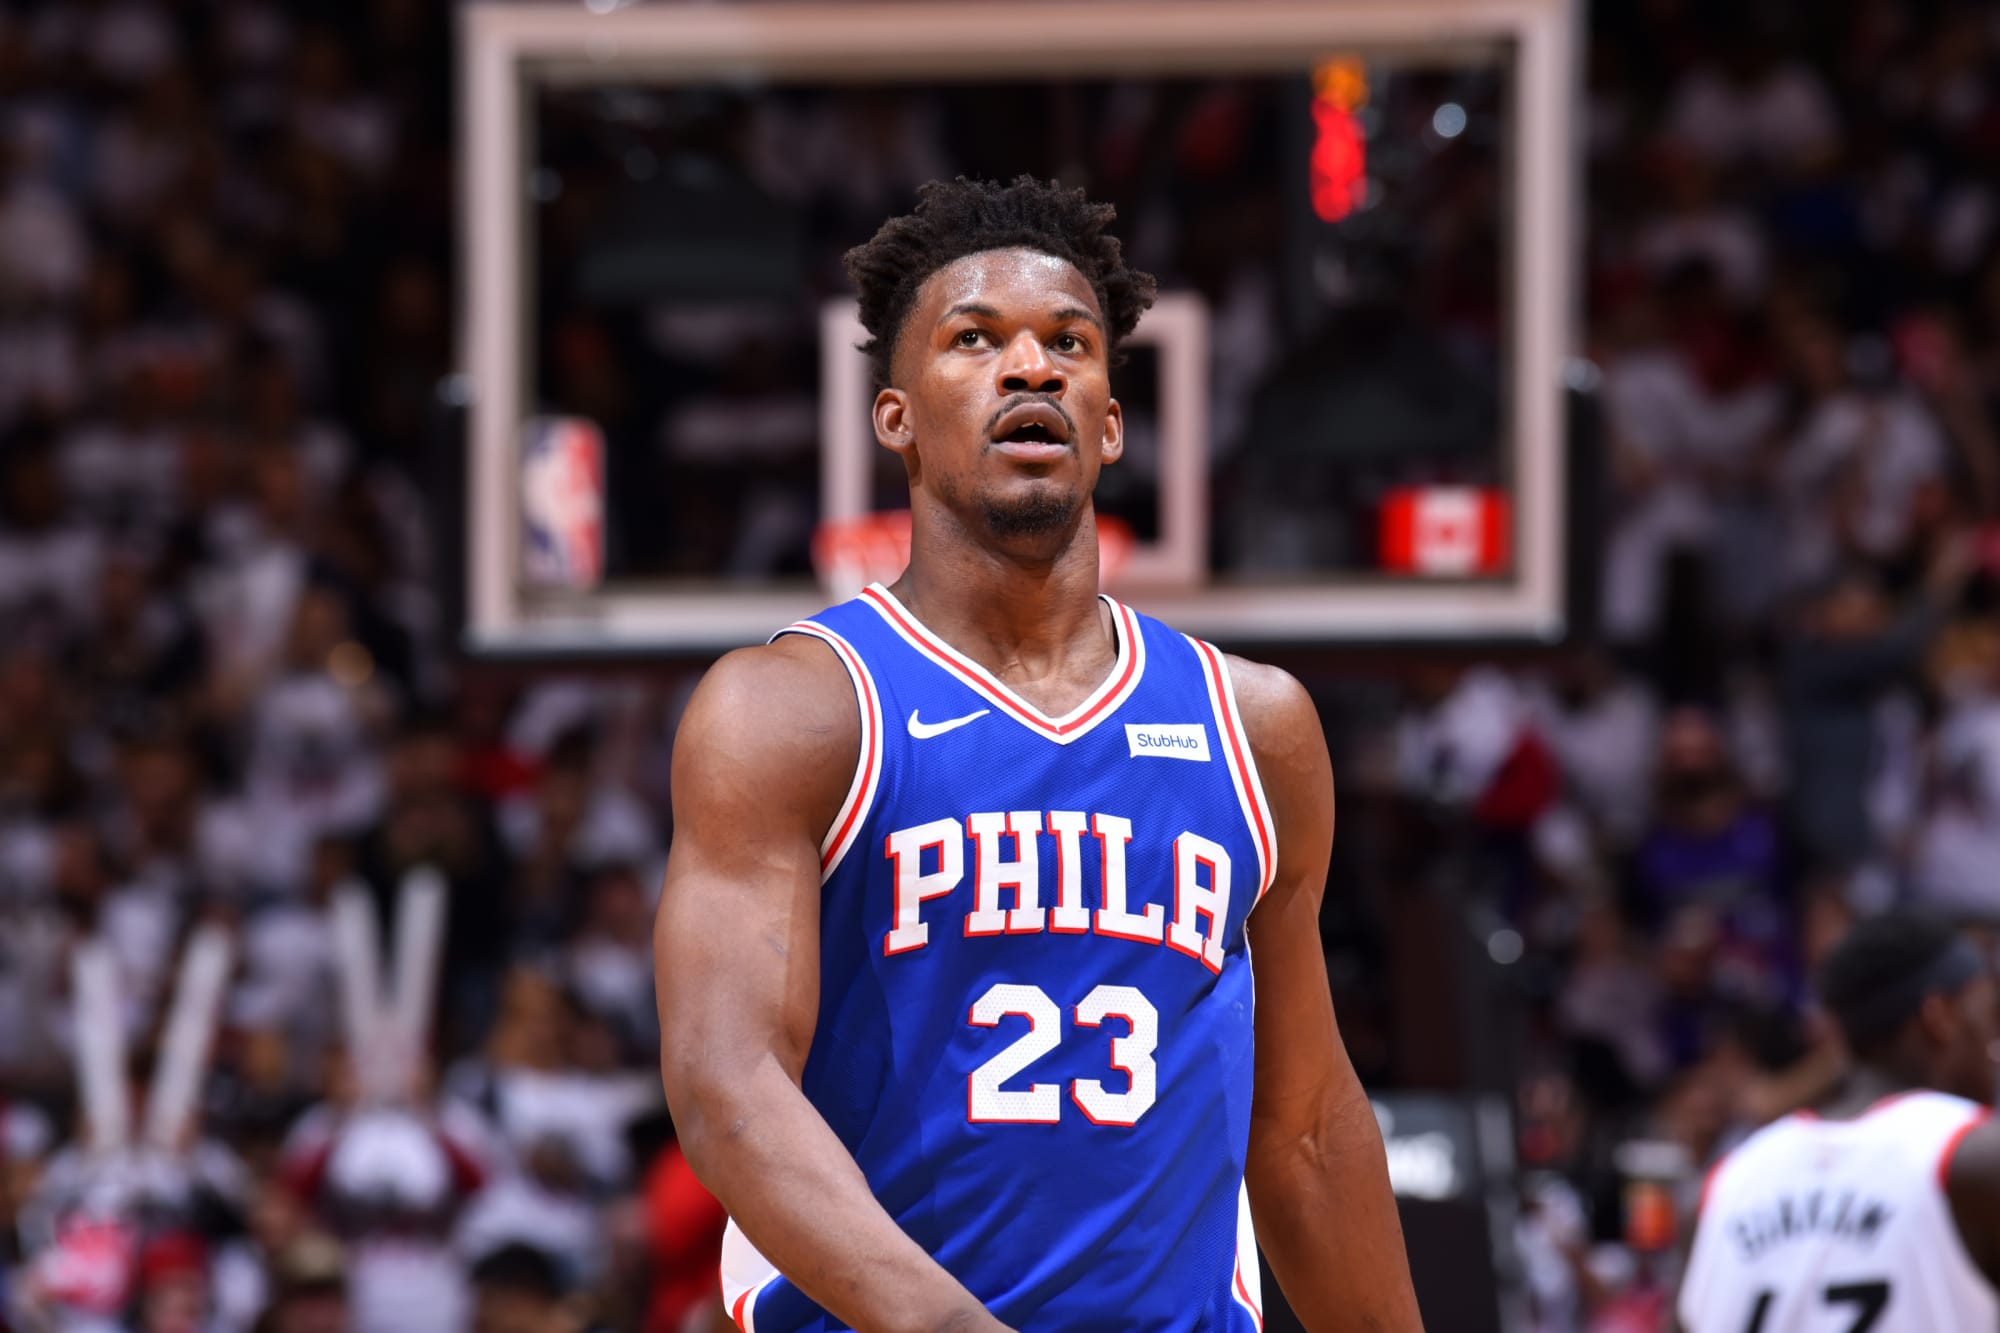 It's Official: The Sixers Have Landed Jimmy Butler